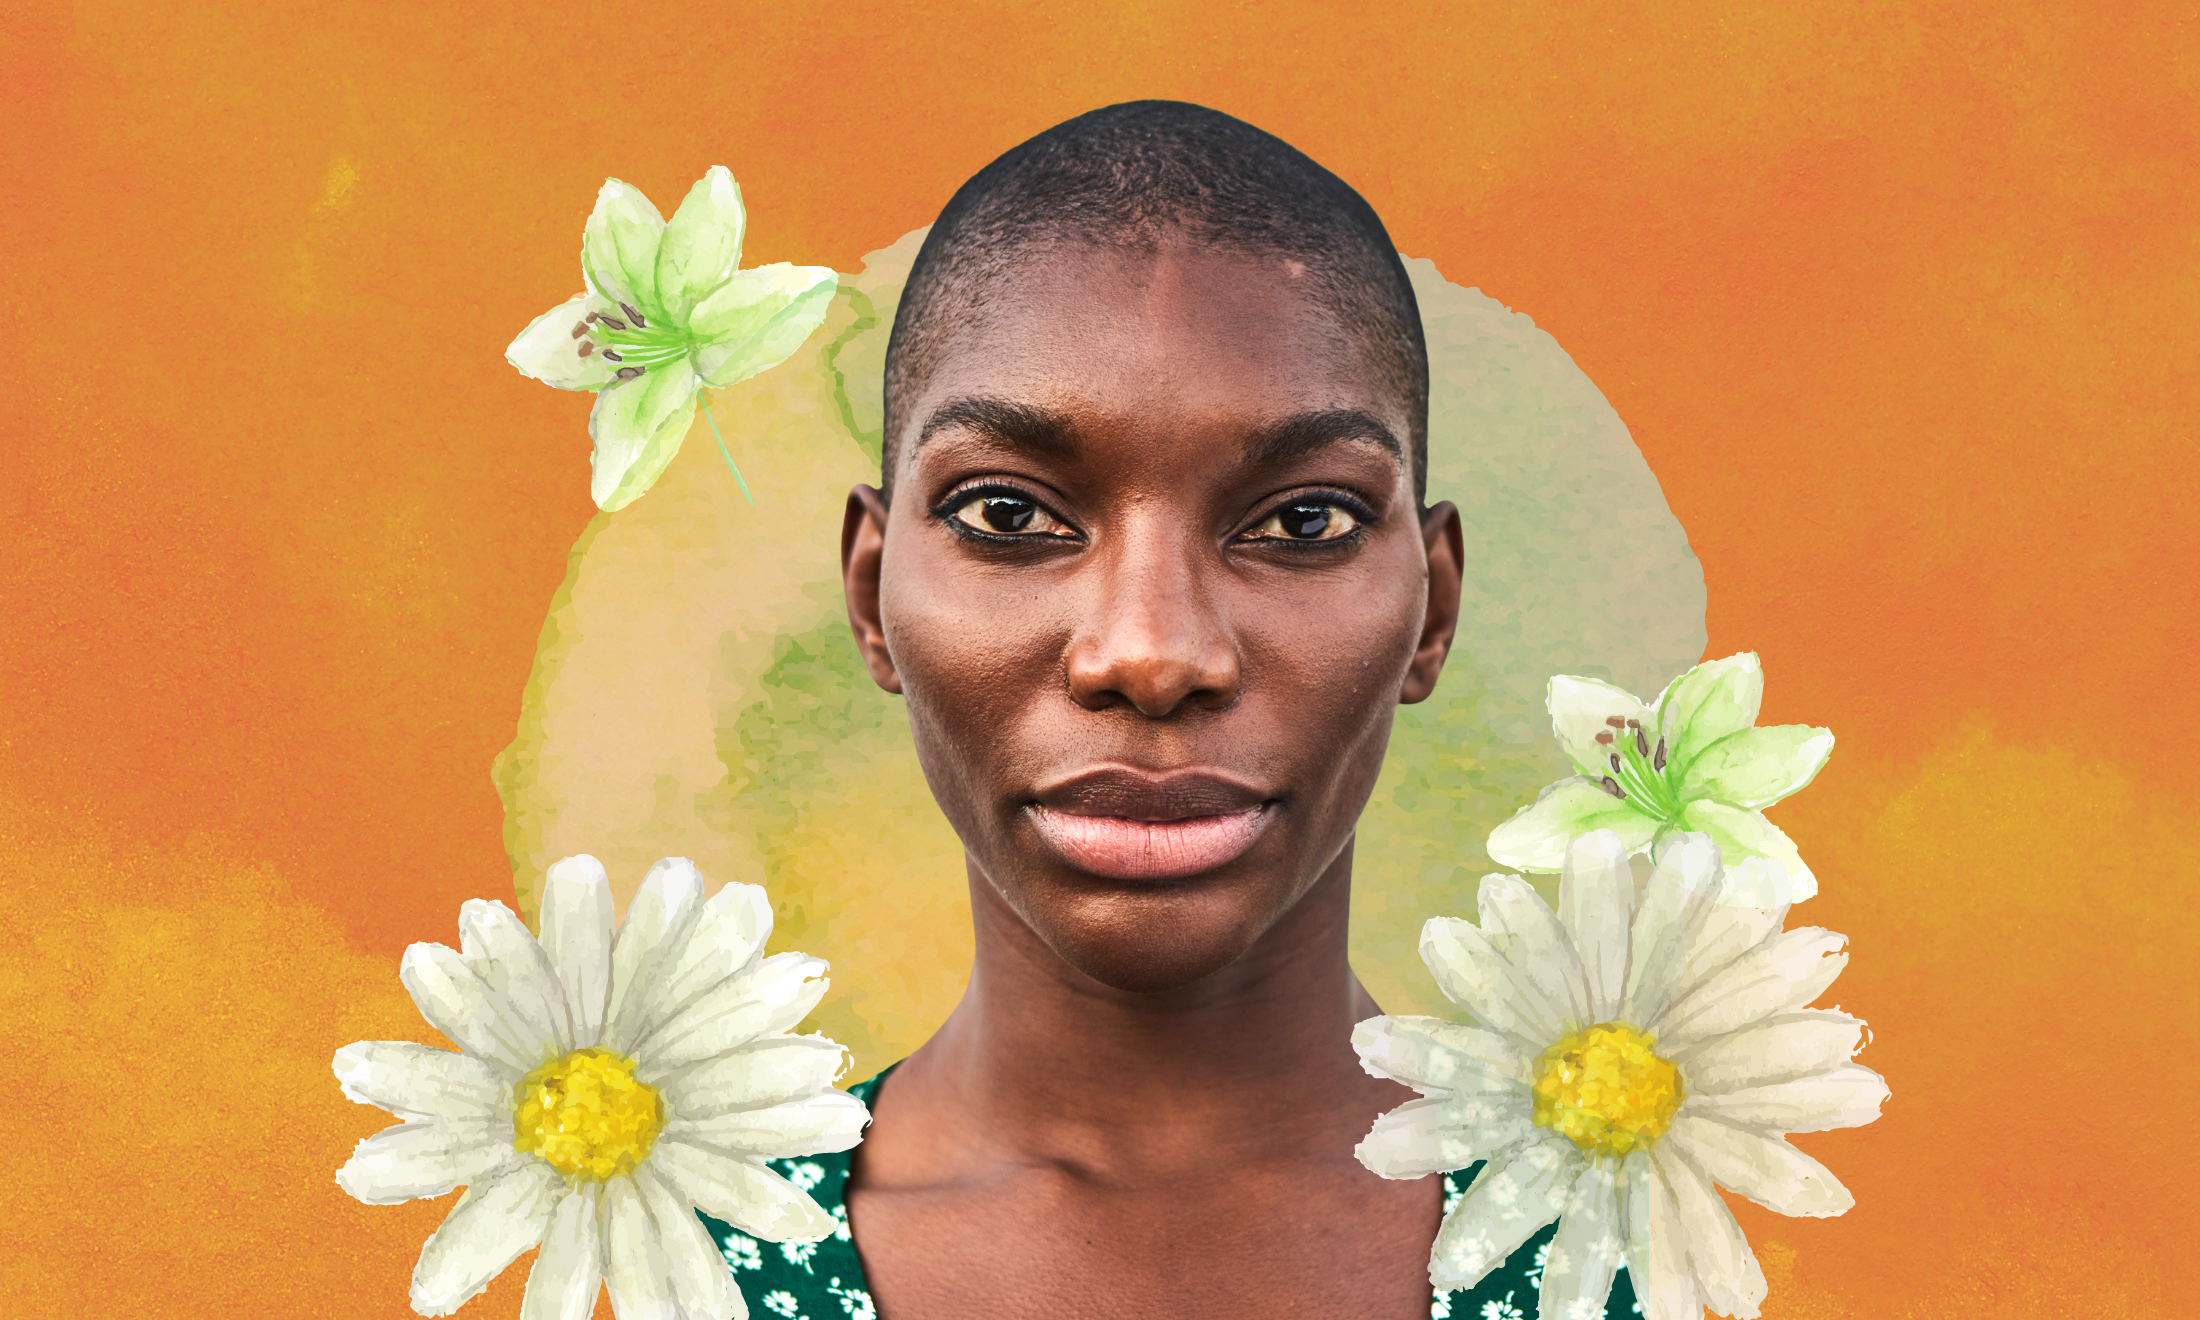 Michaela Coel on discovering racism via a letterbox shit, resisting coconut slurs and fighting bullies